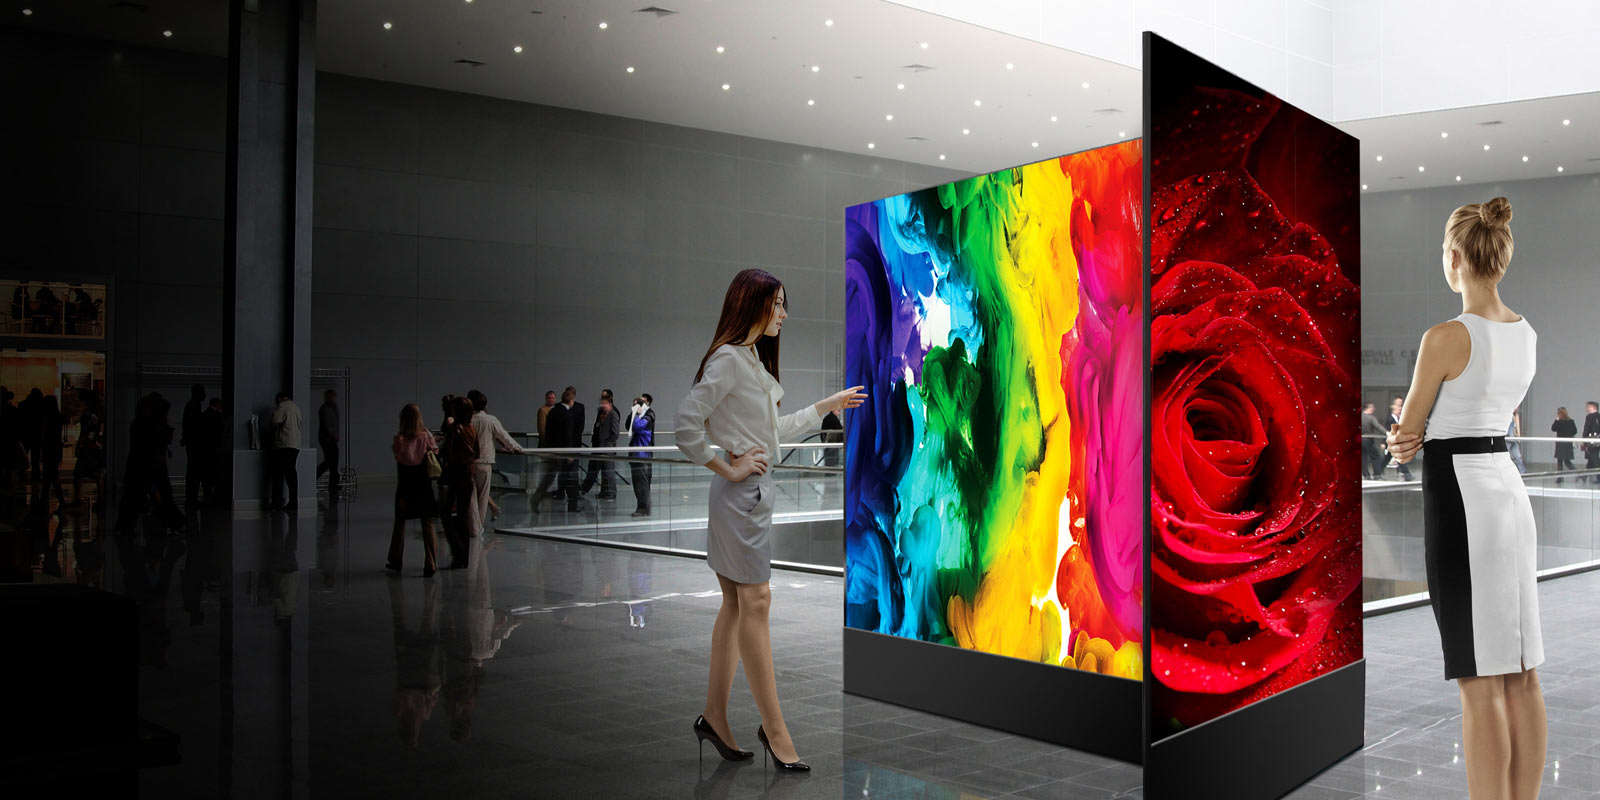 Media asset in full size related to 3dfxzone.it news item entitled as follows: LG pronta a dominare il mercato dei televisori OLED anche nel 2018 | Image Name: news28063_LG-TV-OLED_1.jpg